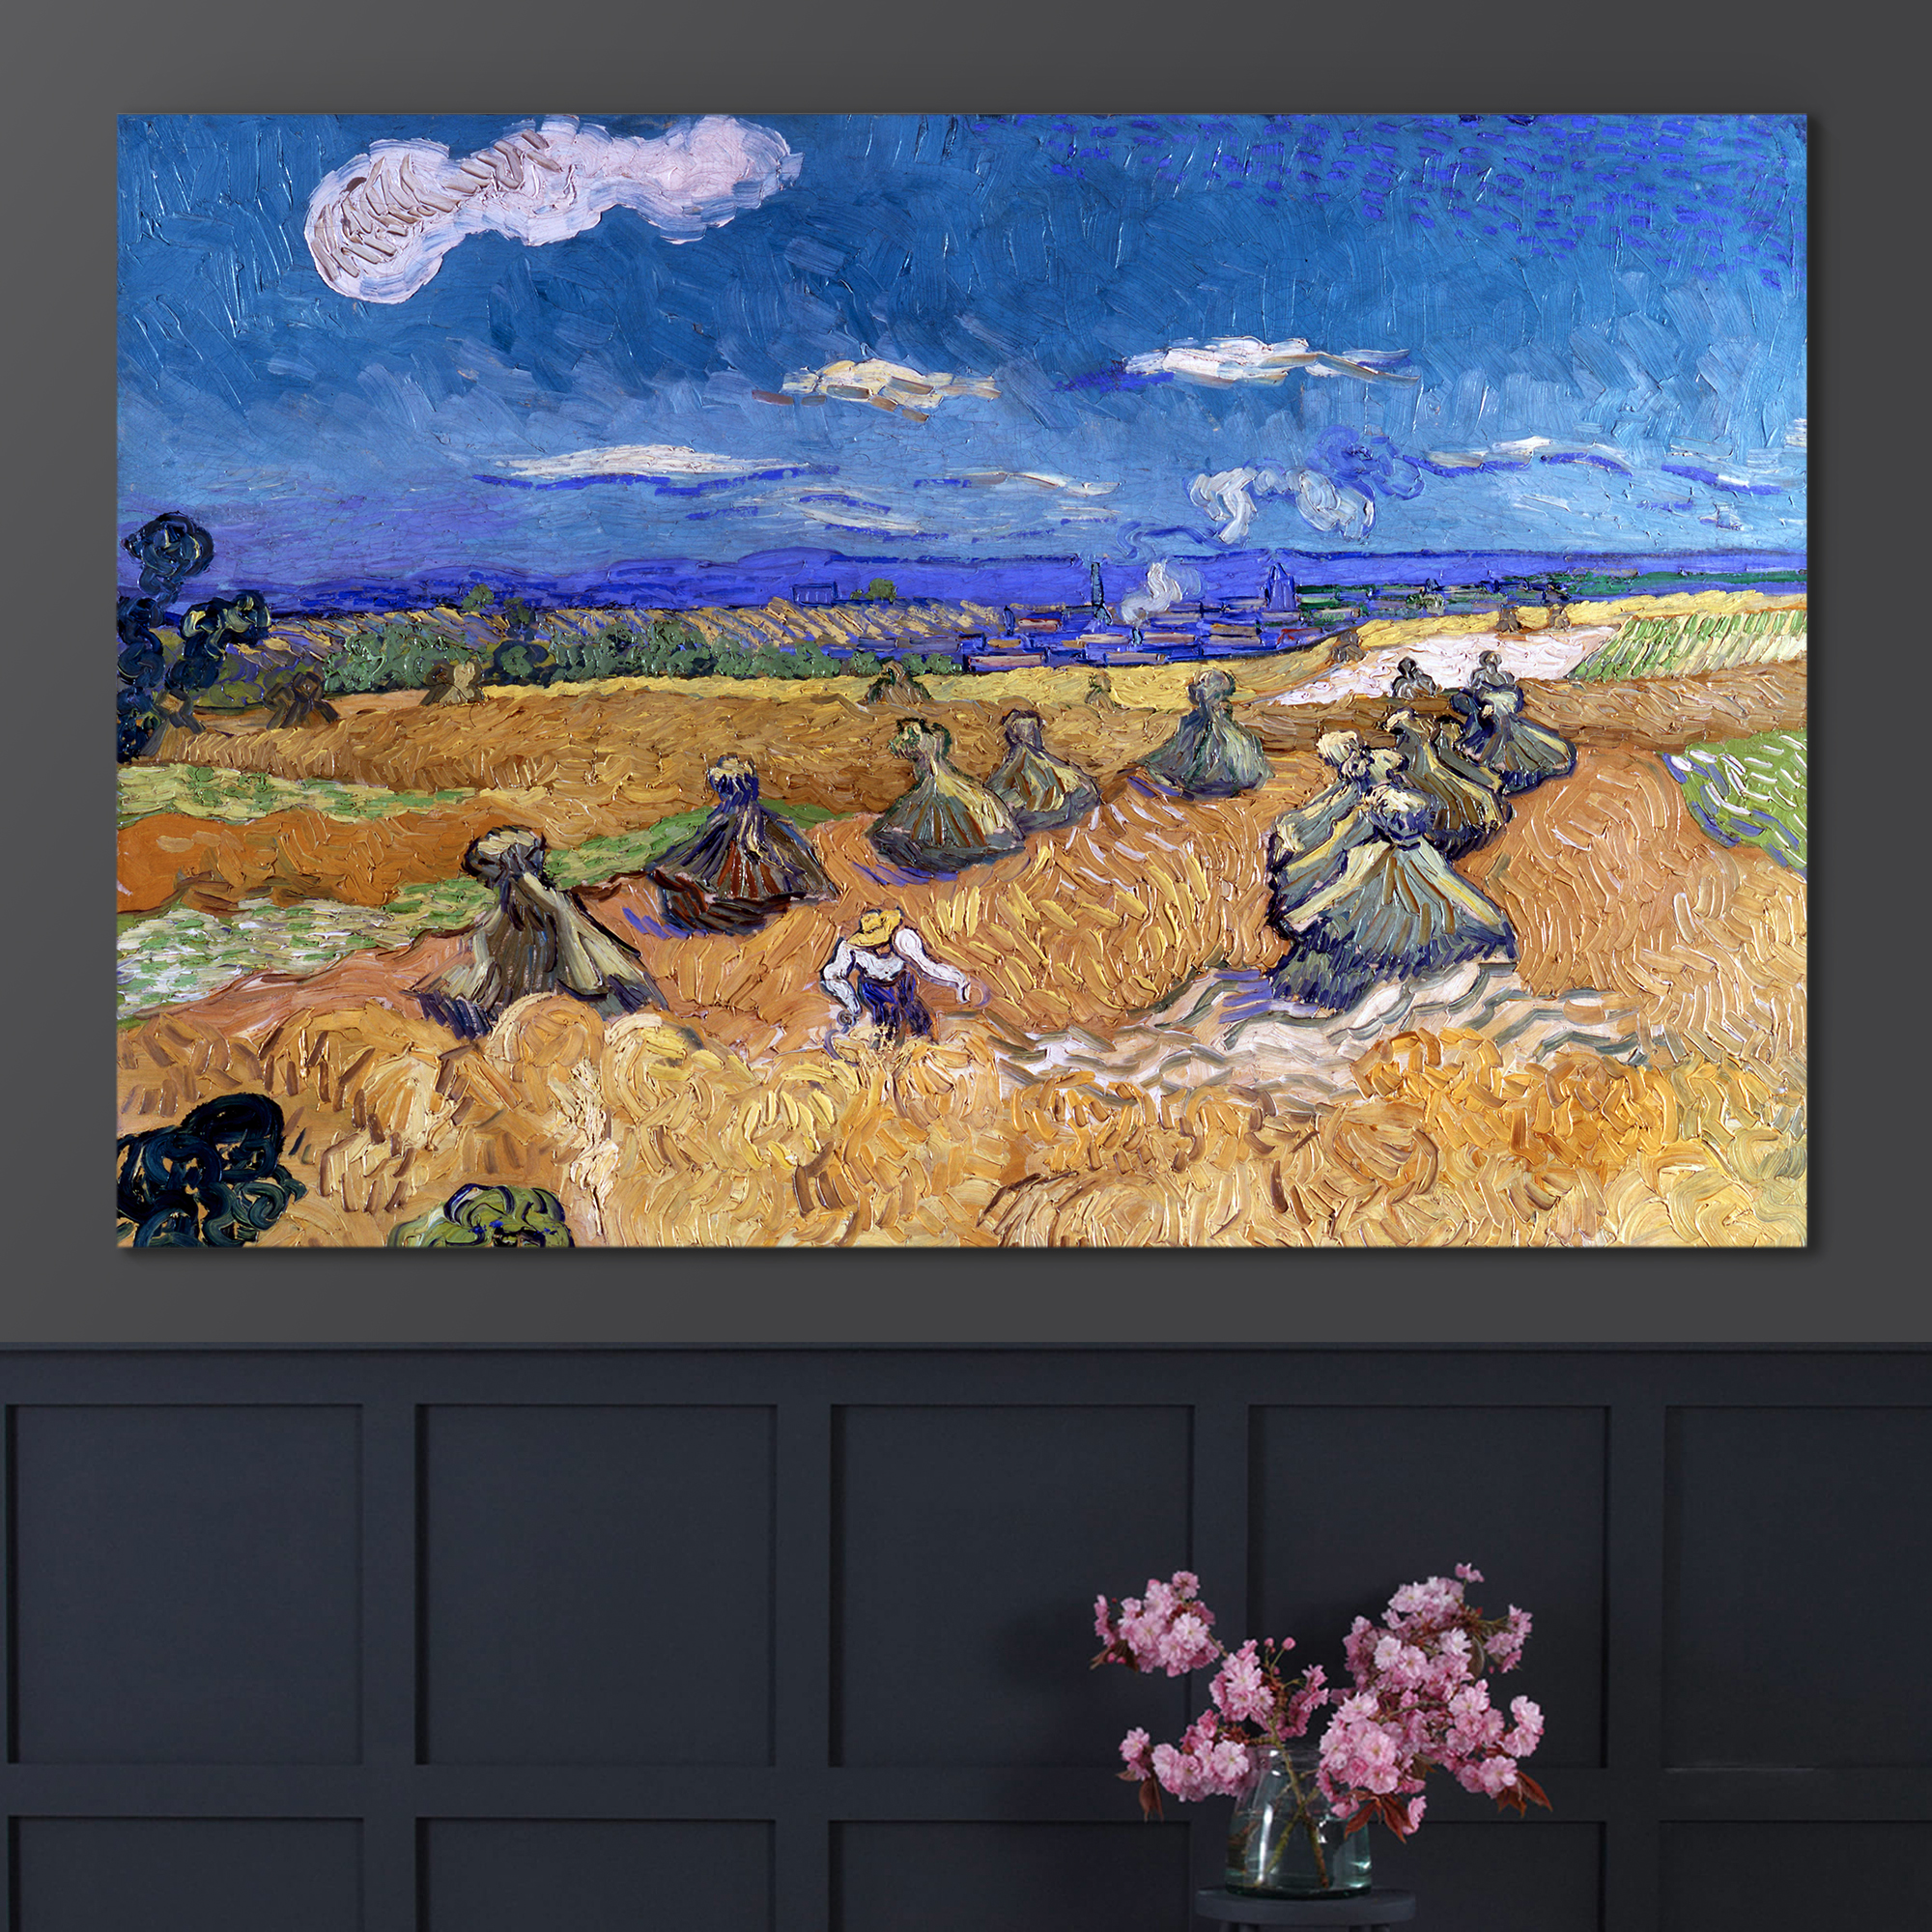 Wheat Fields with Reaper, Auvers by Vincent Van Gogh - Oil Painting Reproduction on Canvas Prints Wall Art, Ready to Hang - 24